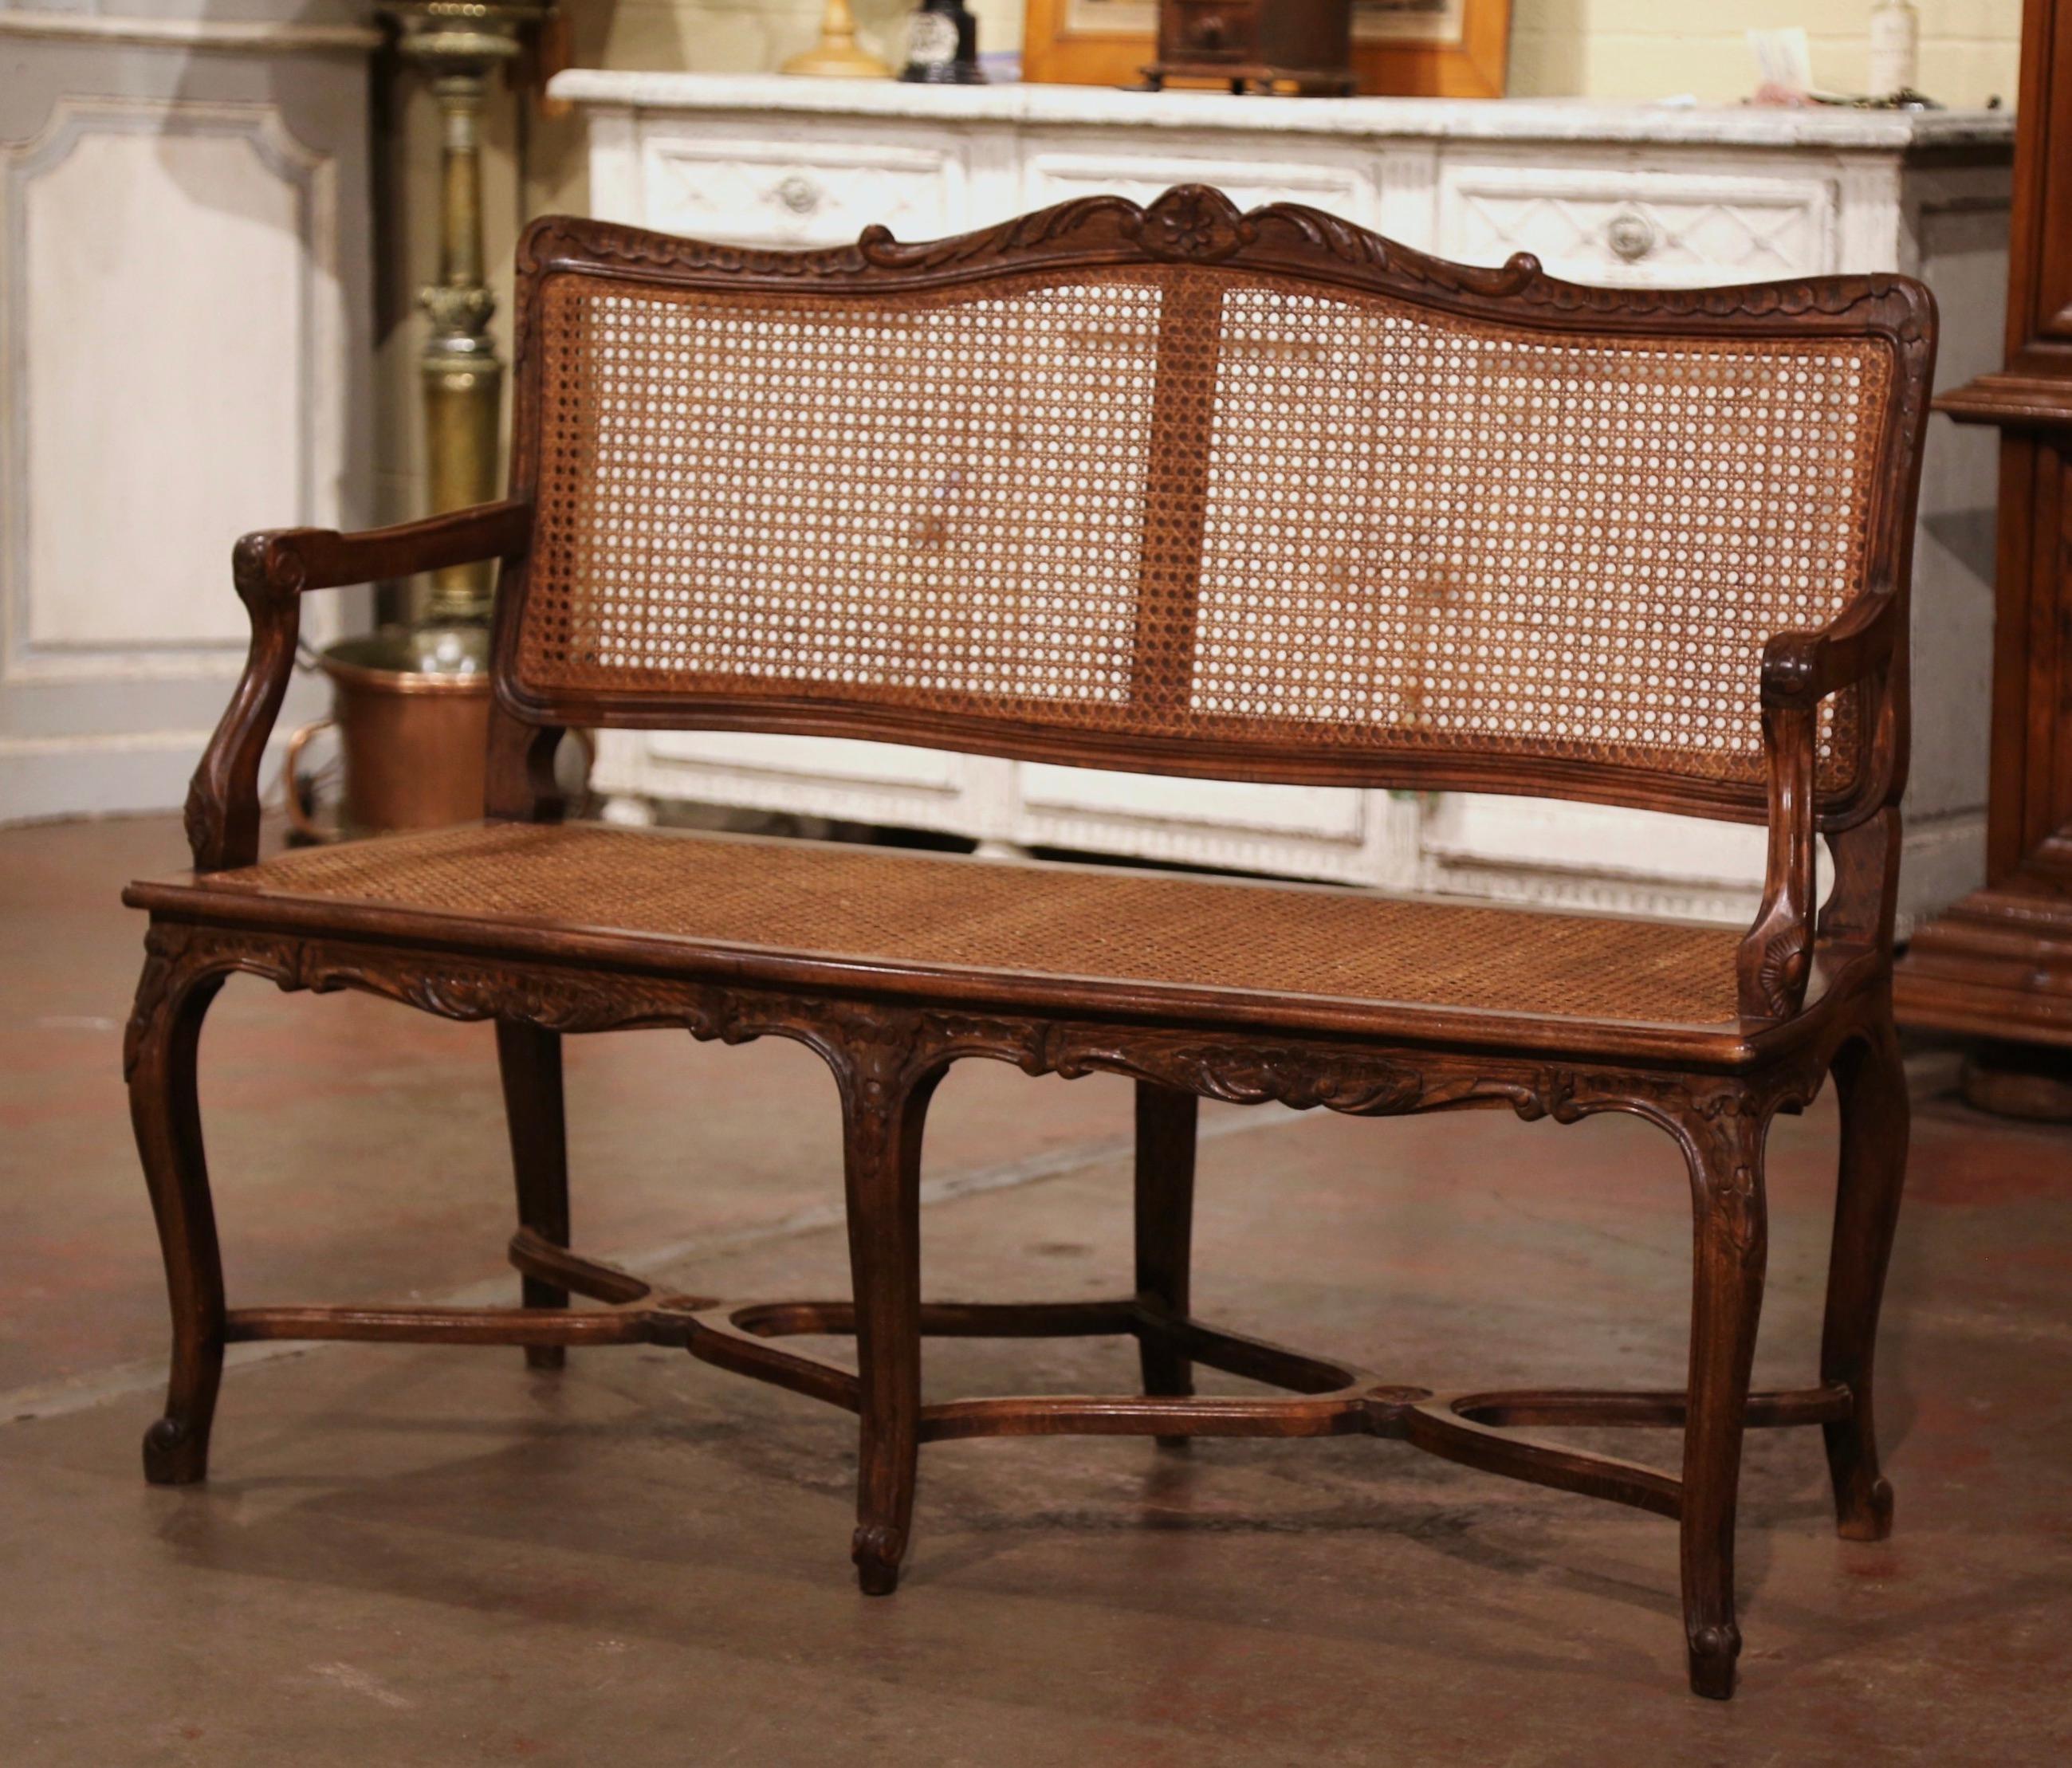 Caning Mid-Century French Louis XV Carved Beech Wood and Cane Six-Leg Settee Bench